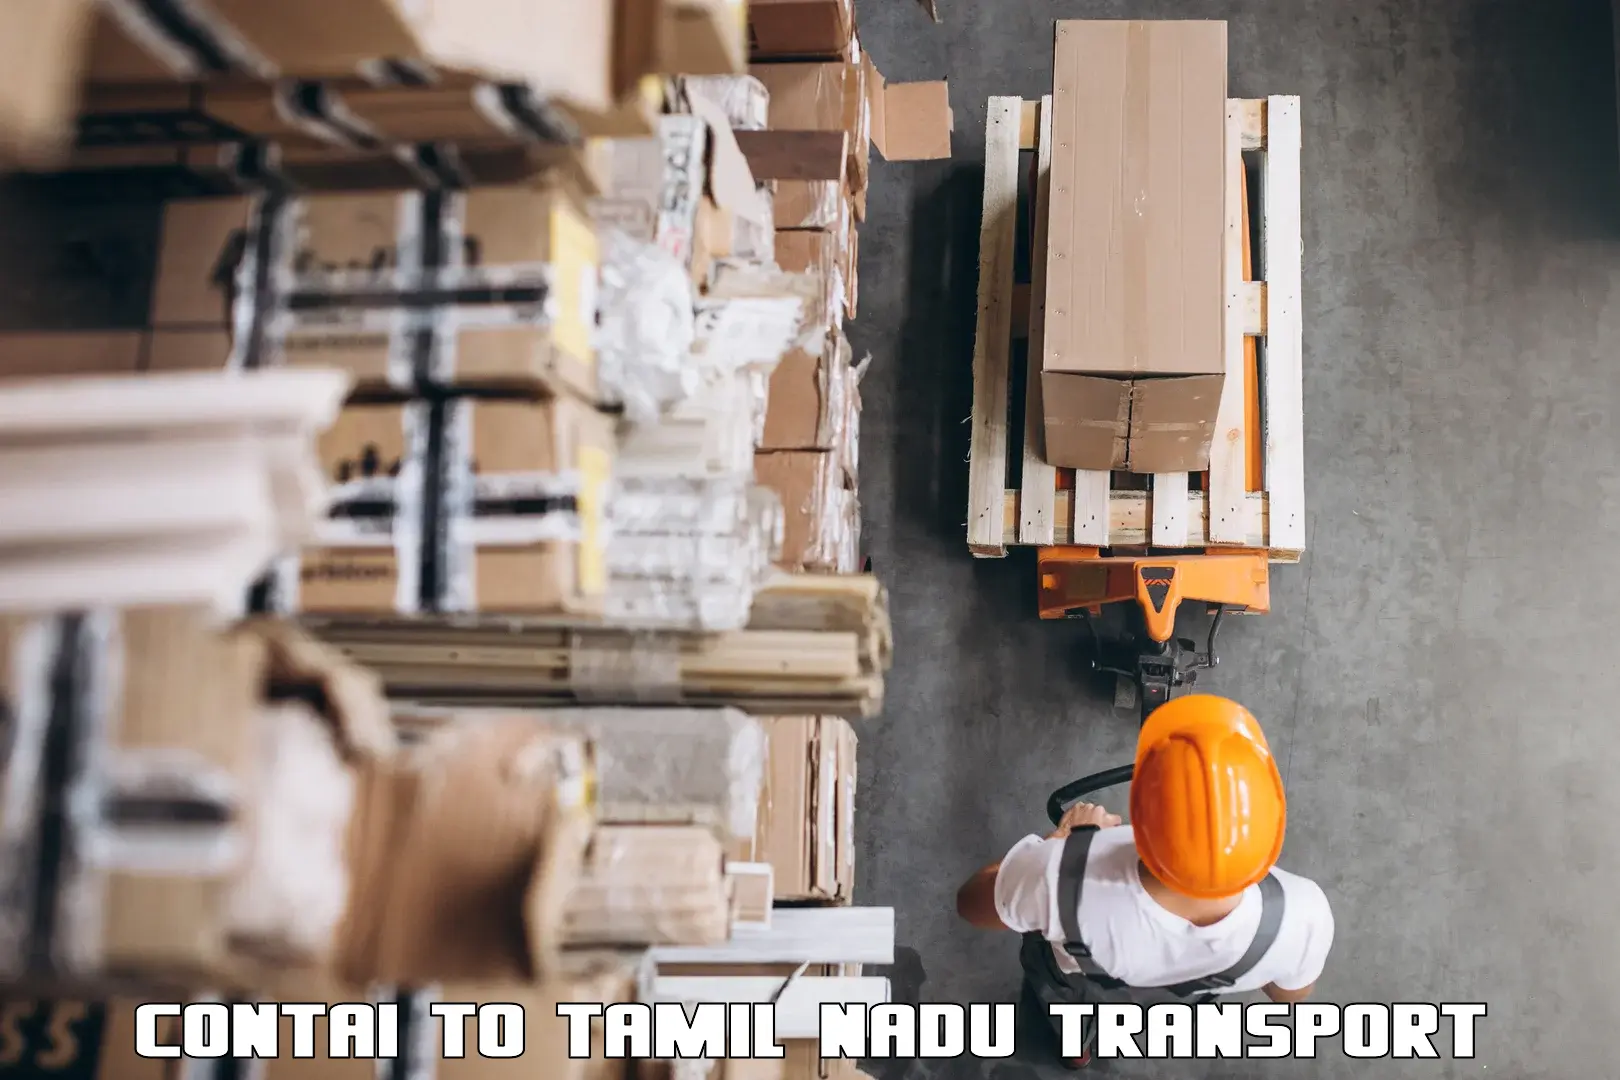 Part load transport service in India Contai to Tamil Nadu